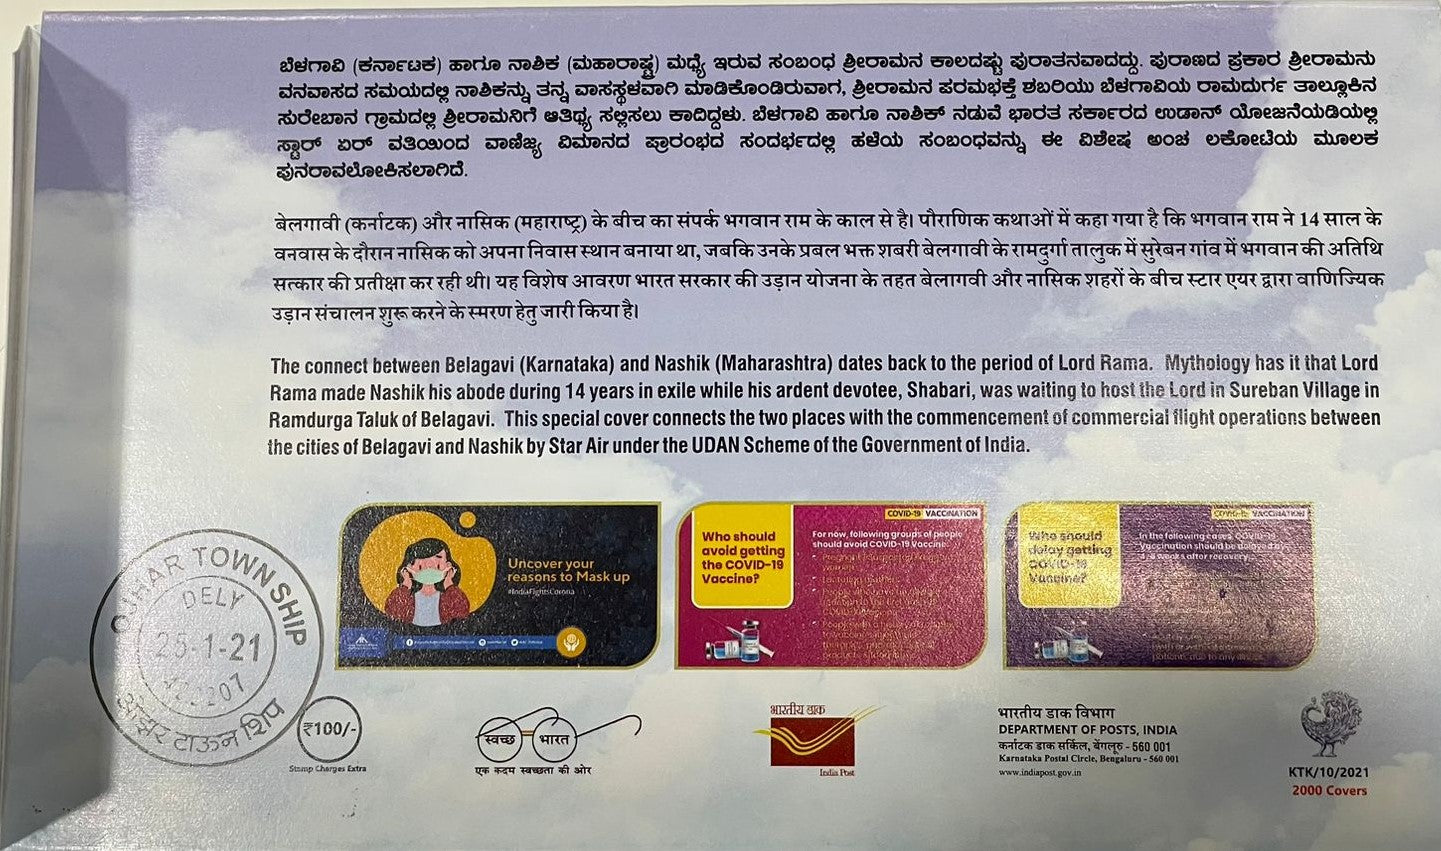 First Flight Carried Special Cover    Related to Maha epic Ramayana